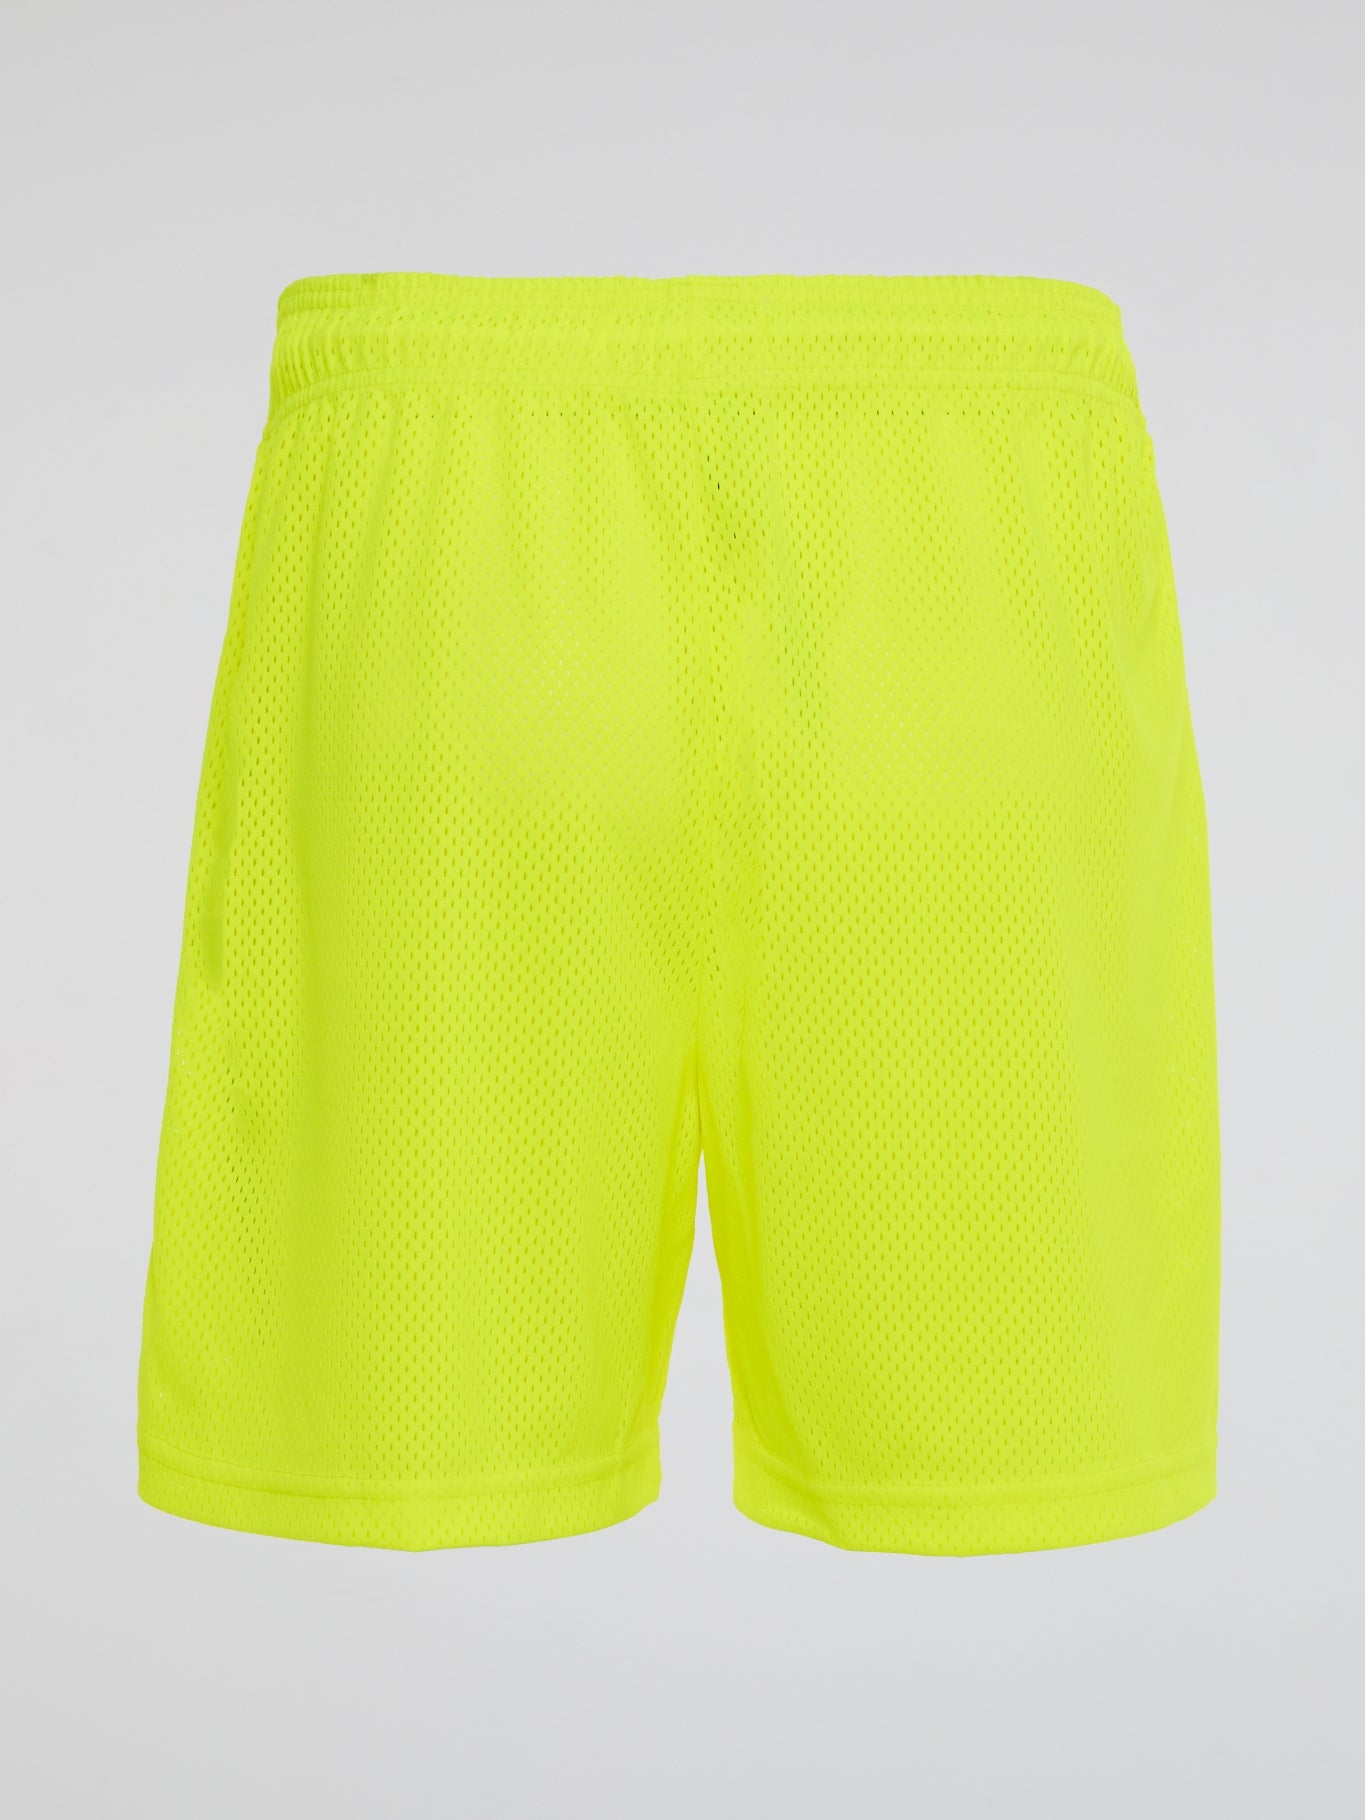 Neon Perforated Waistband Shorts